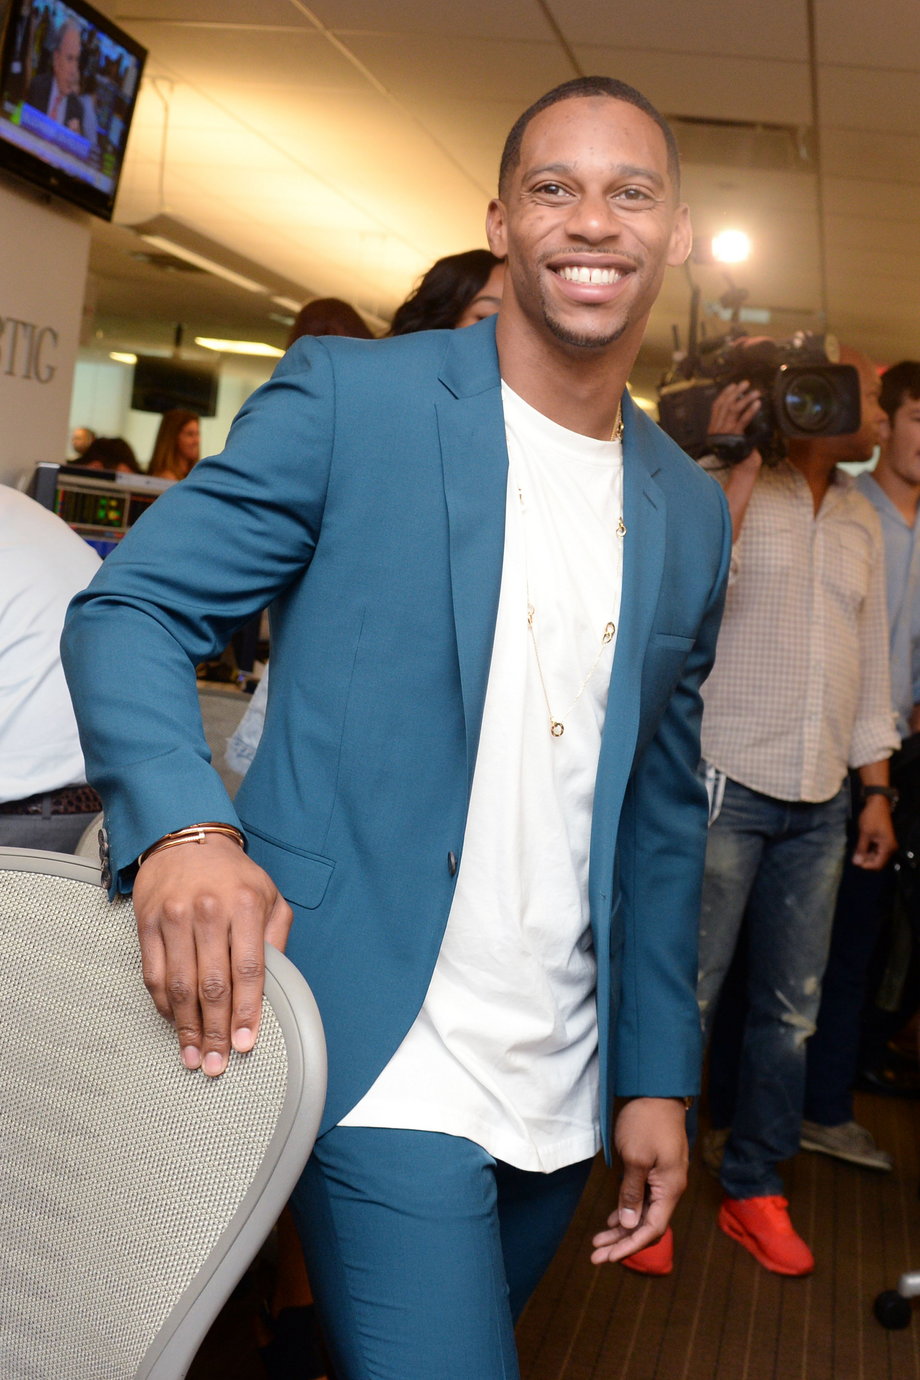 Football player Victor Cruz came by the charity day.